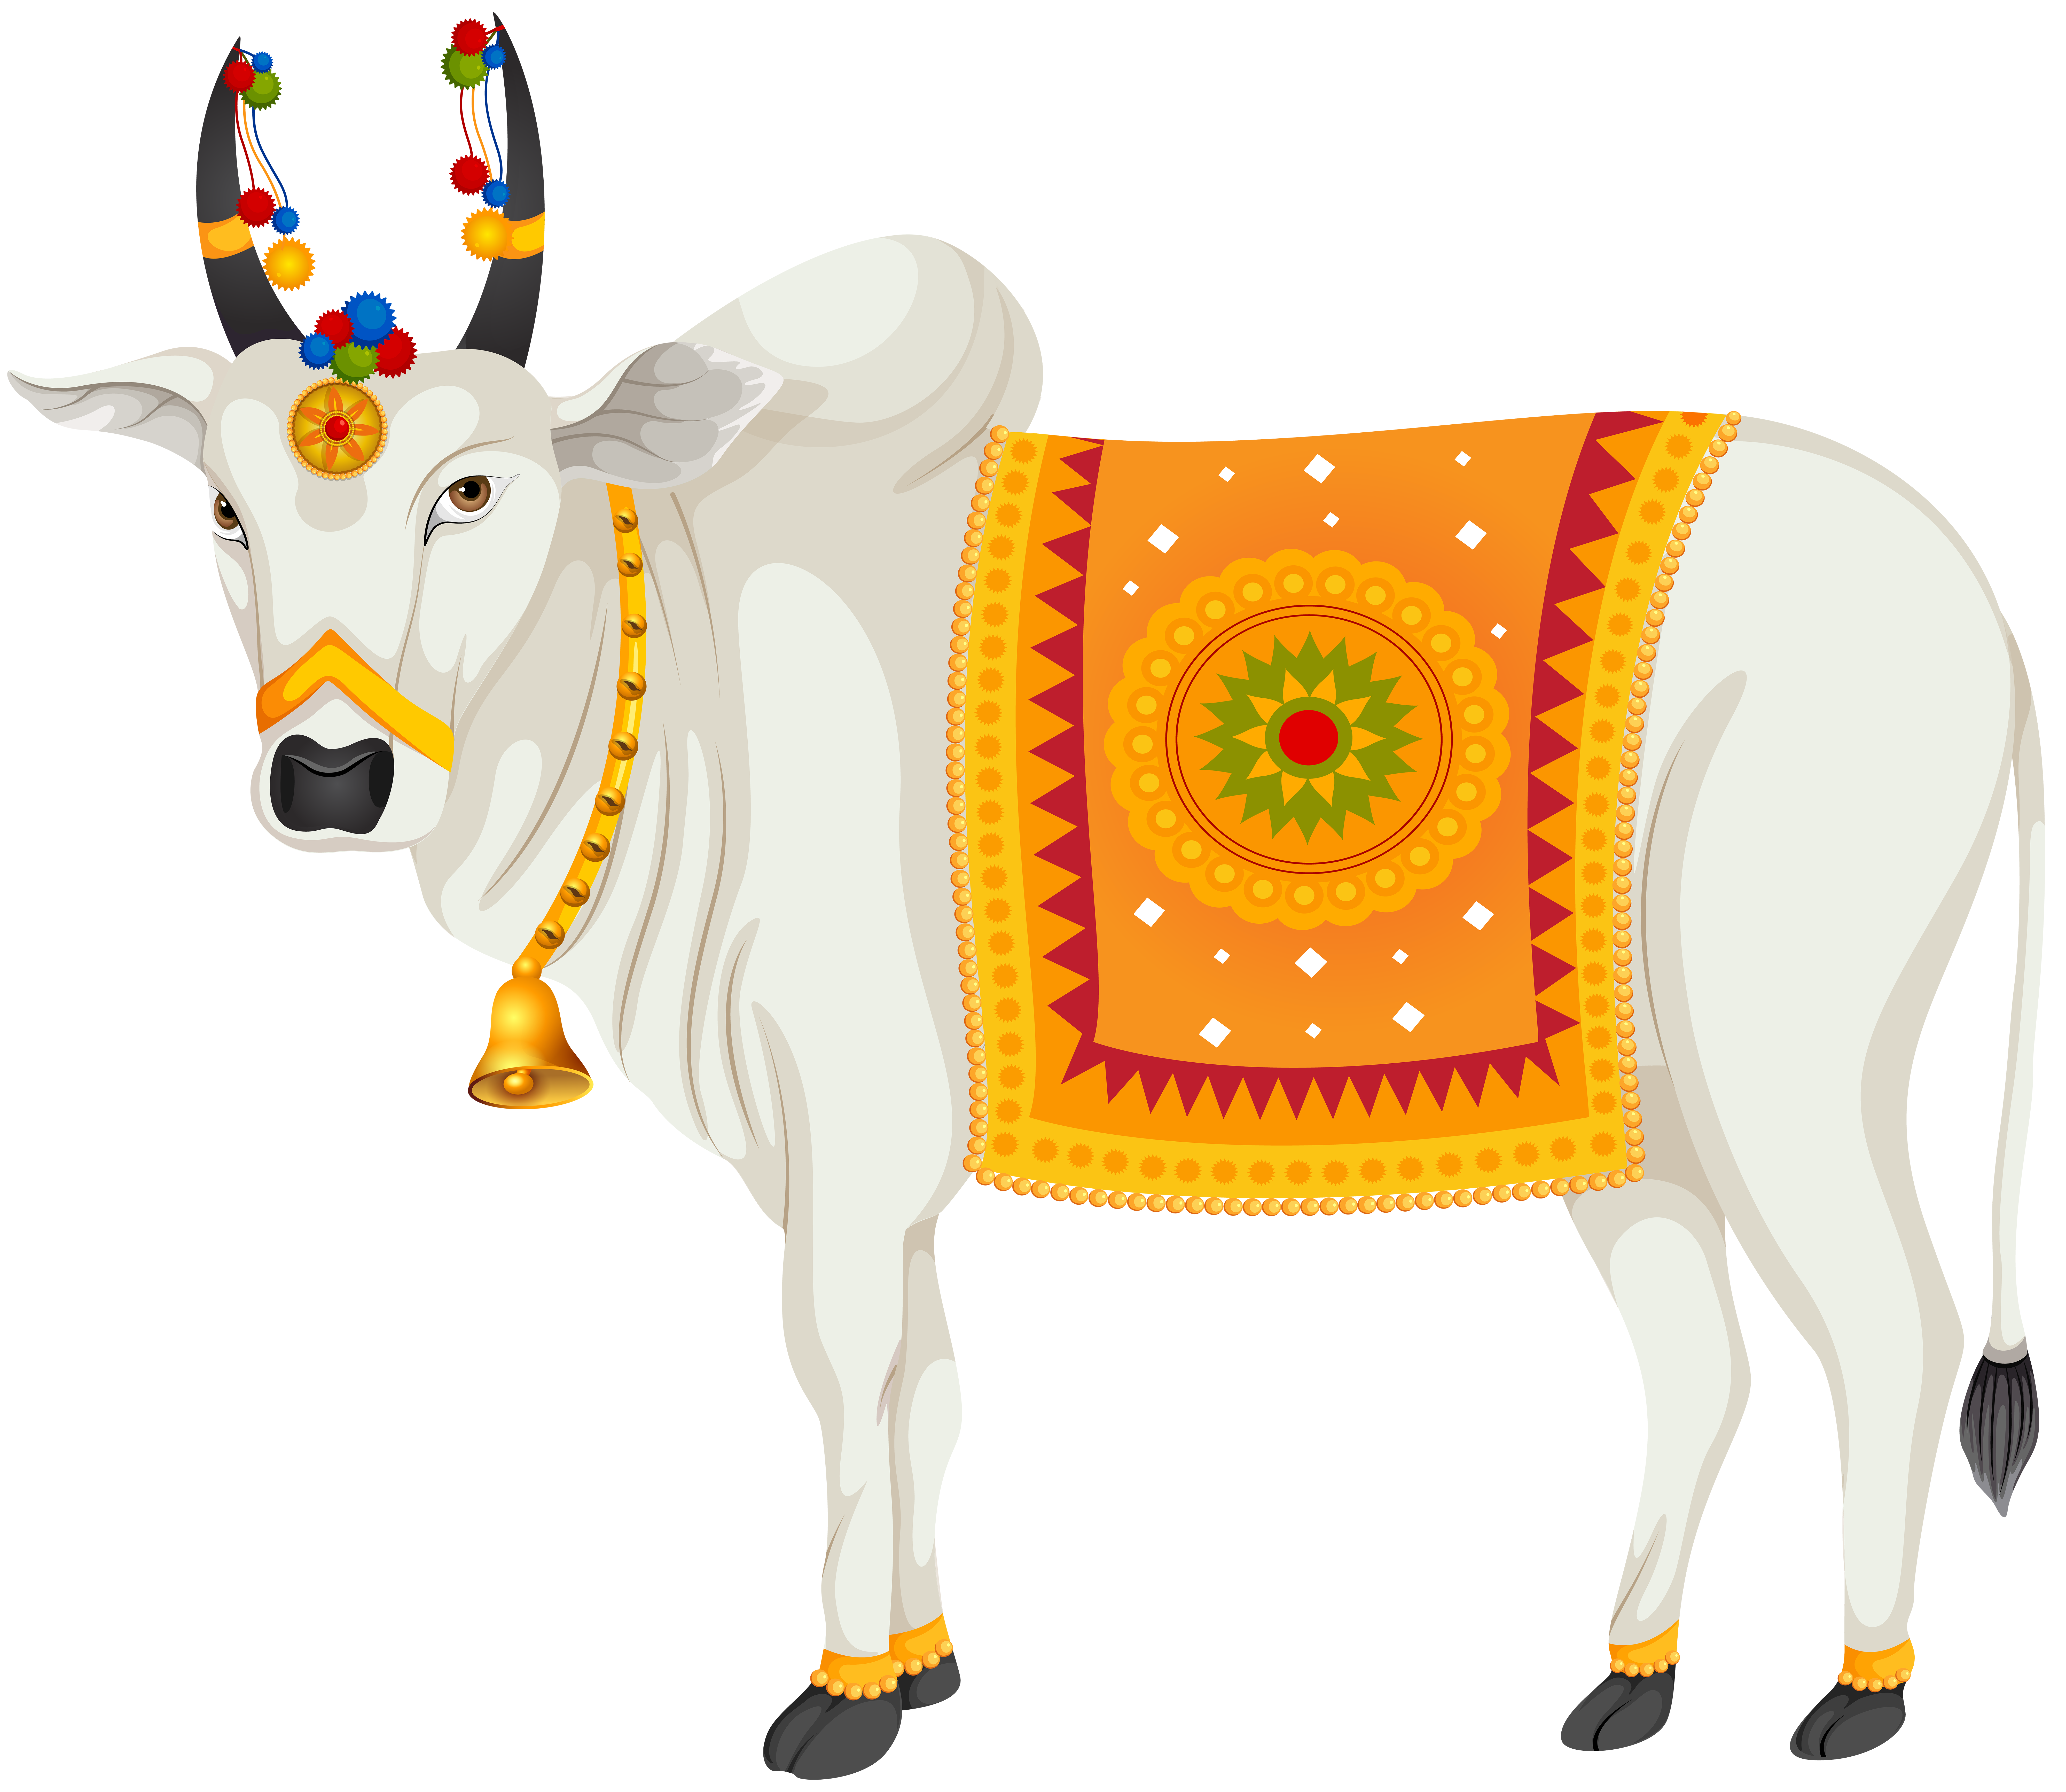 India Holy Cow Transparent Clip Art Image Quality Image And Transparent PNG Free Clipart